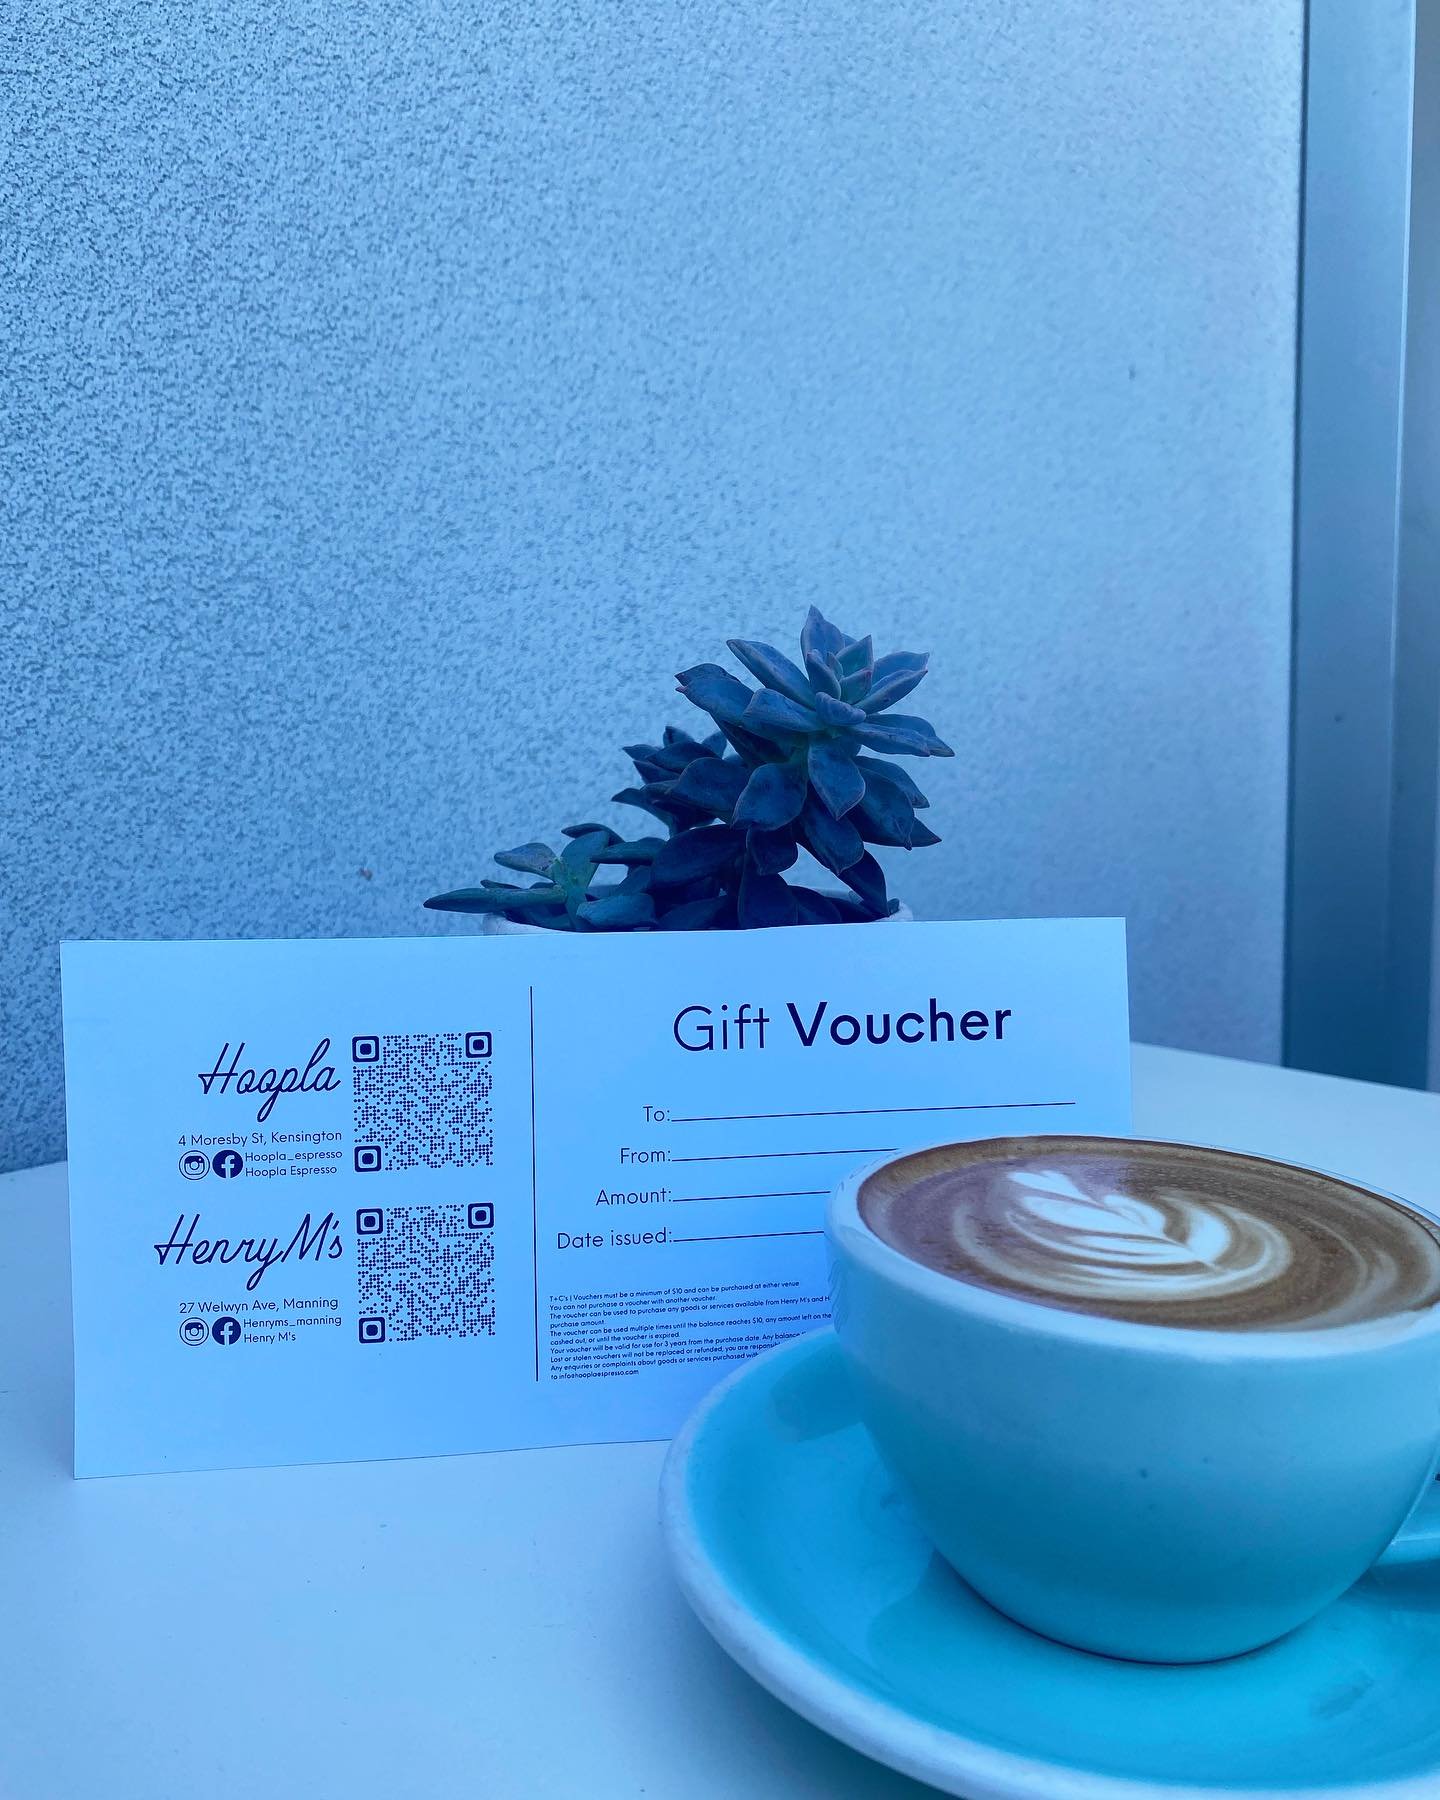 Someone&rsquo;s birthday coming up and can&rsquo;t think of what to get? Bless them with the gift of caffeine and delicious food. Gift vouchers available in store, just ask our friendly staff! 🎁